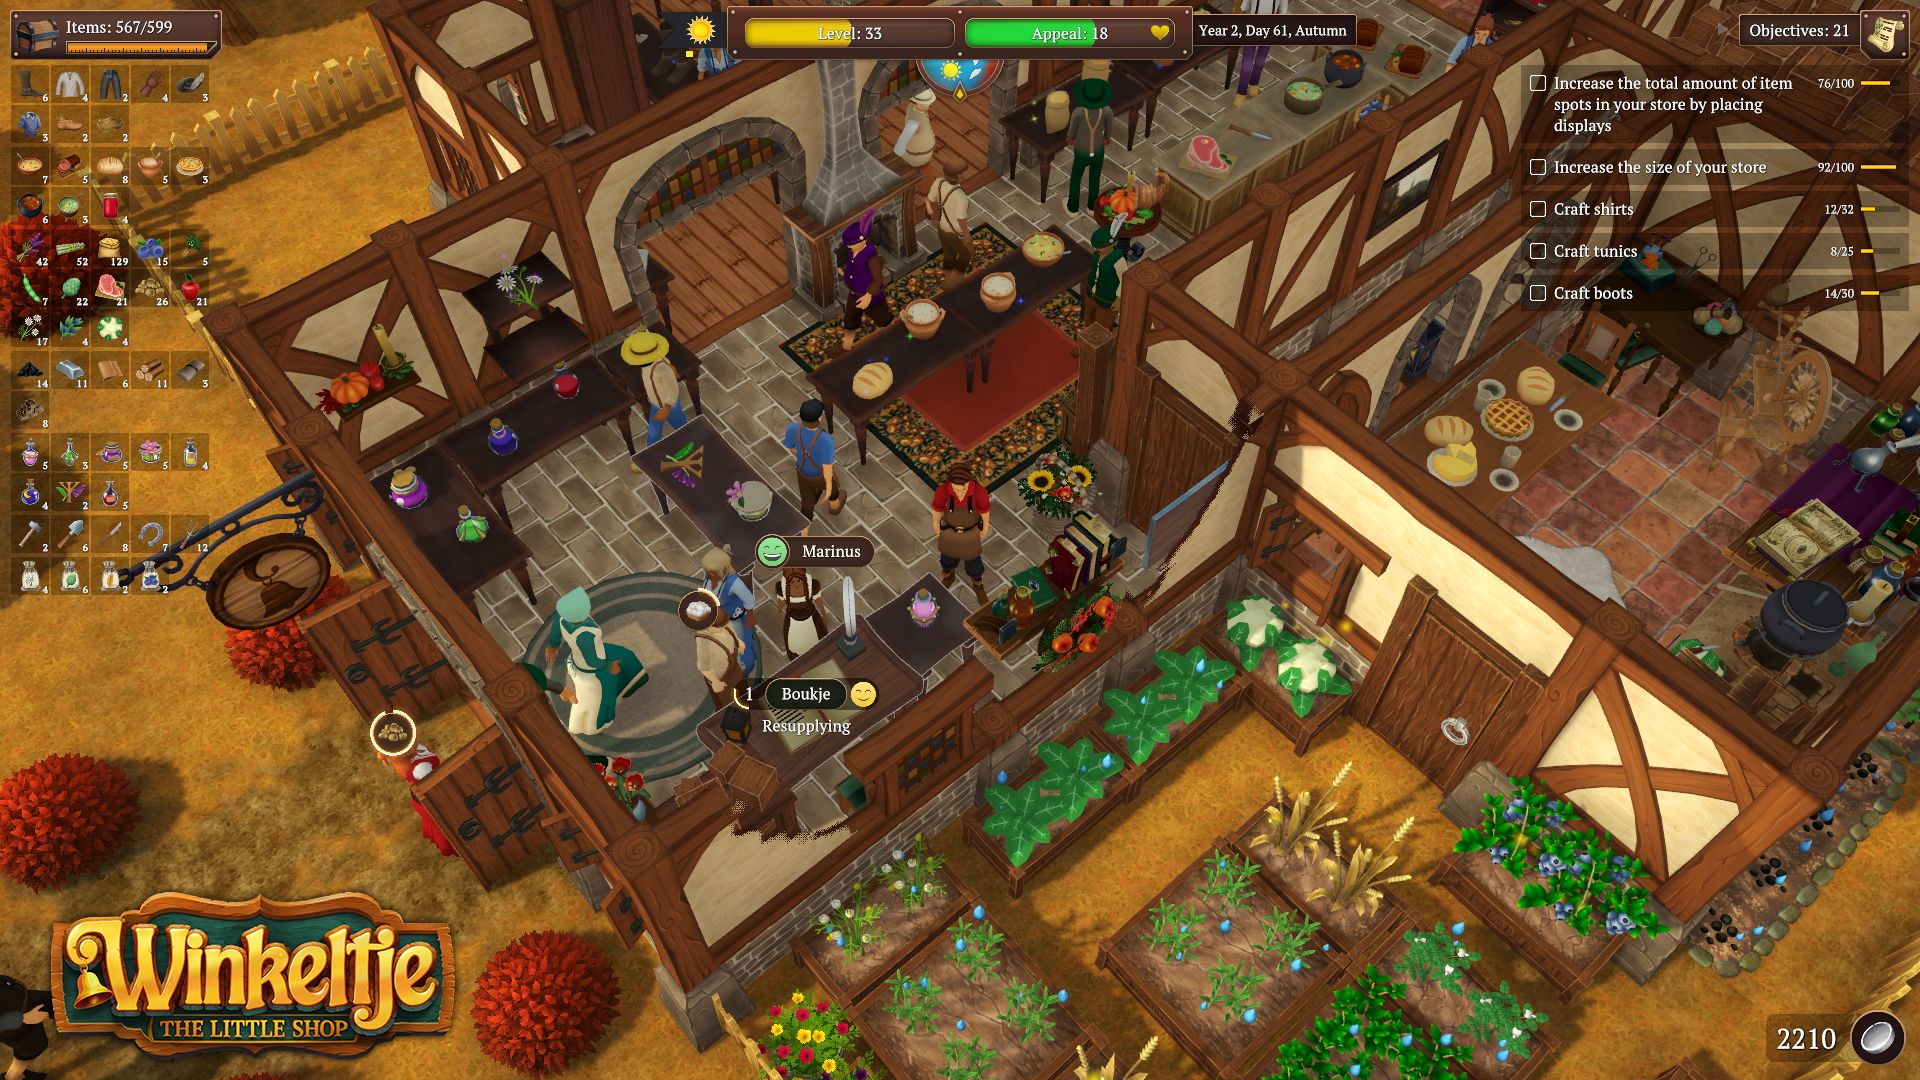 Winkeltje The Little Shop, screenshot showing gameplay of running your own shop and growing ingredients